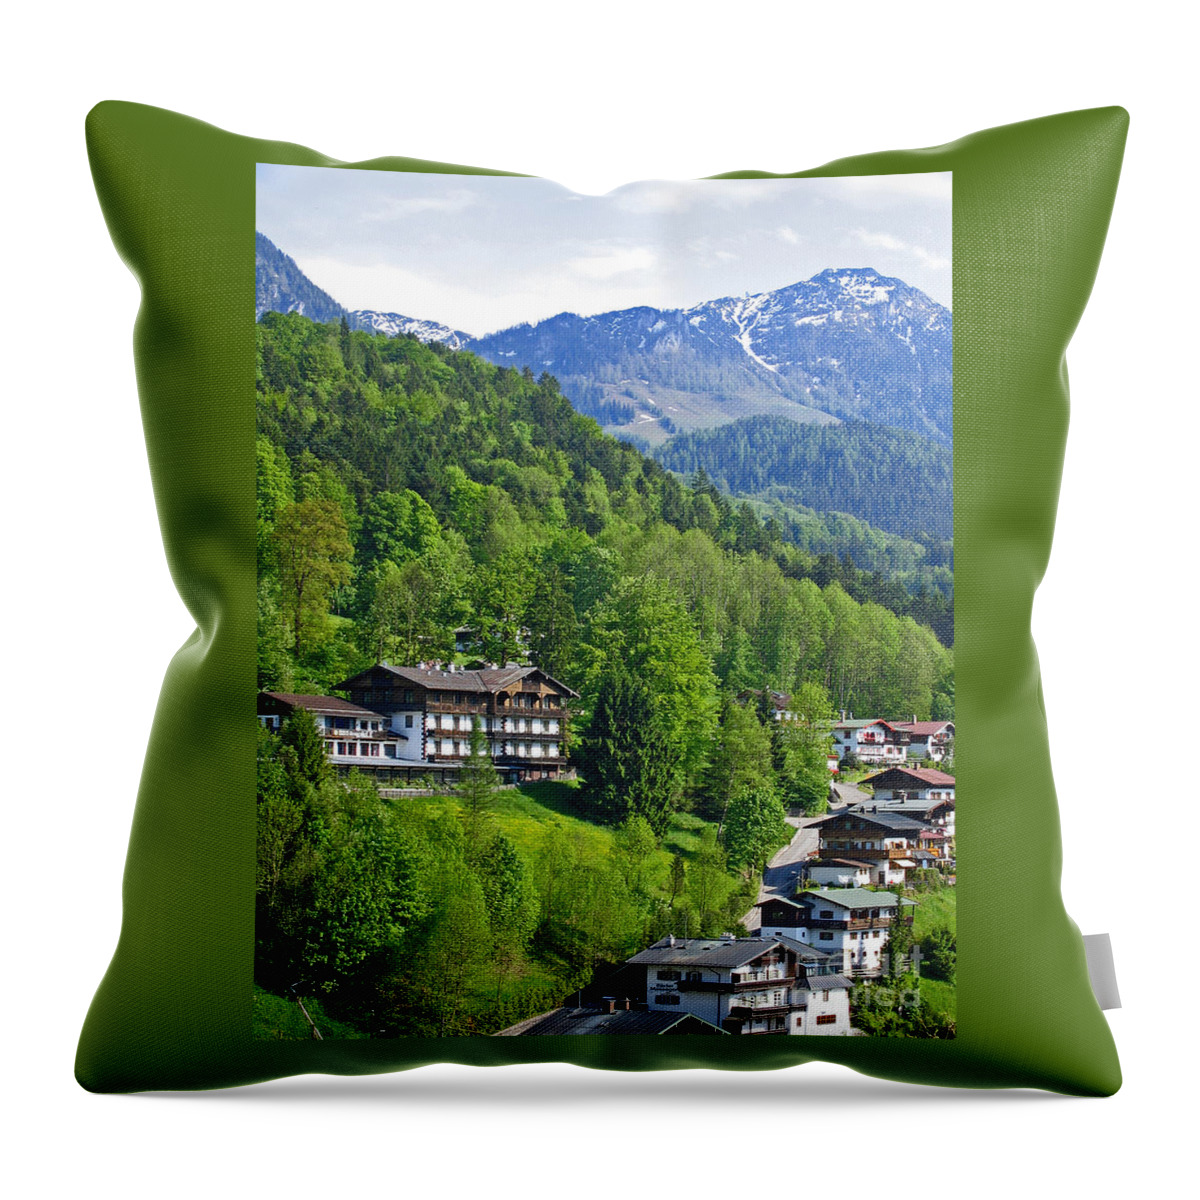 Germany Throw Pillow featuring the photograph Bavarian Mountainside by Ann Horn